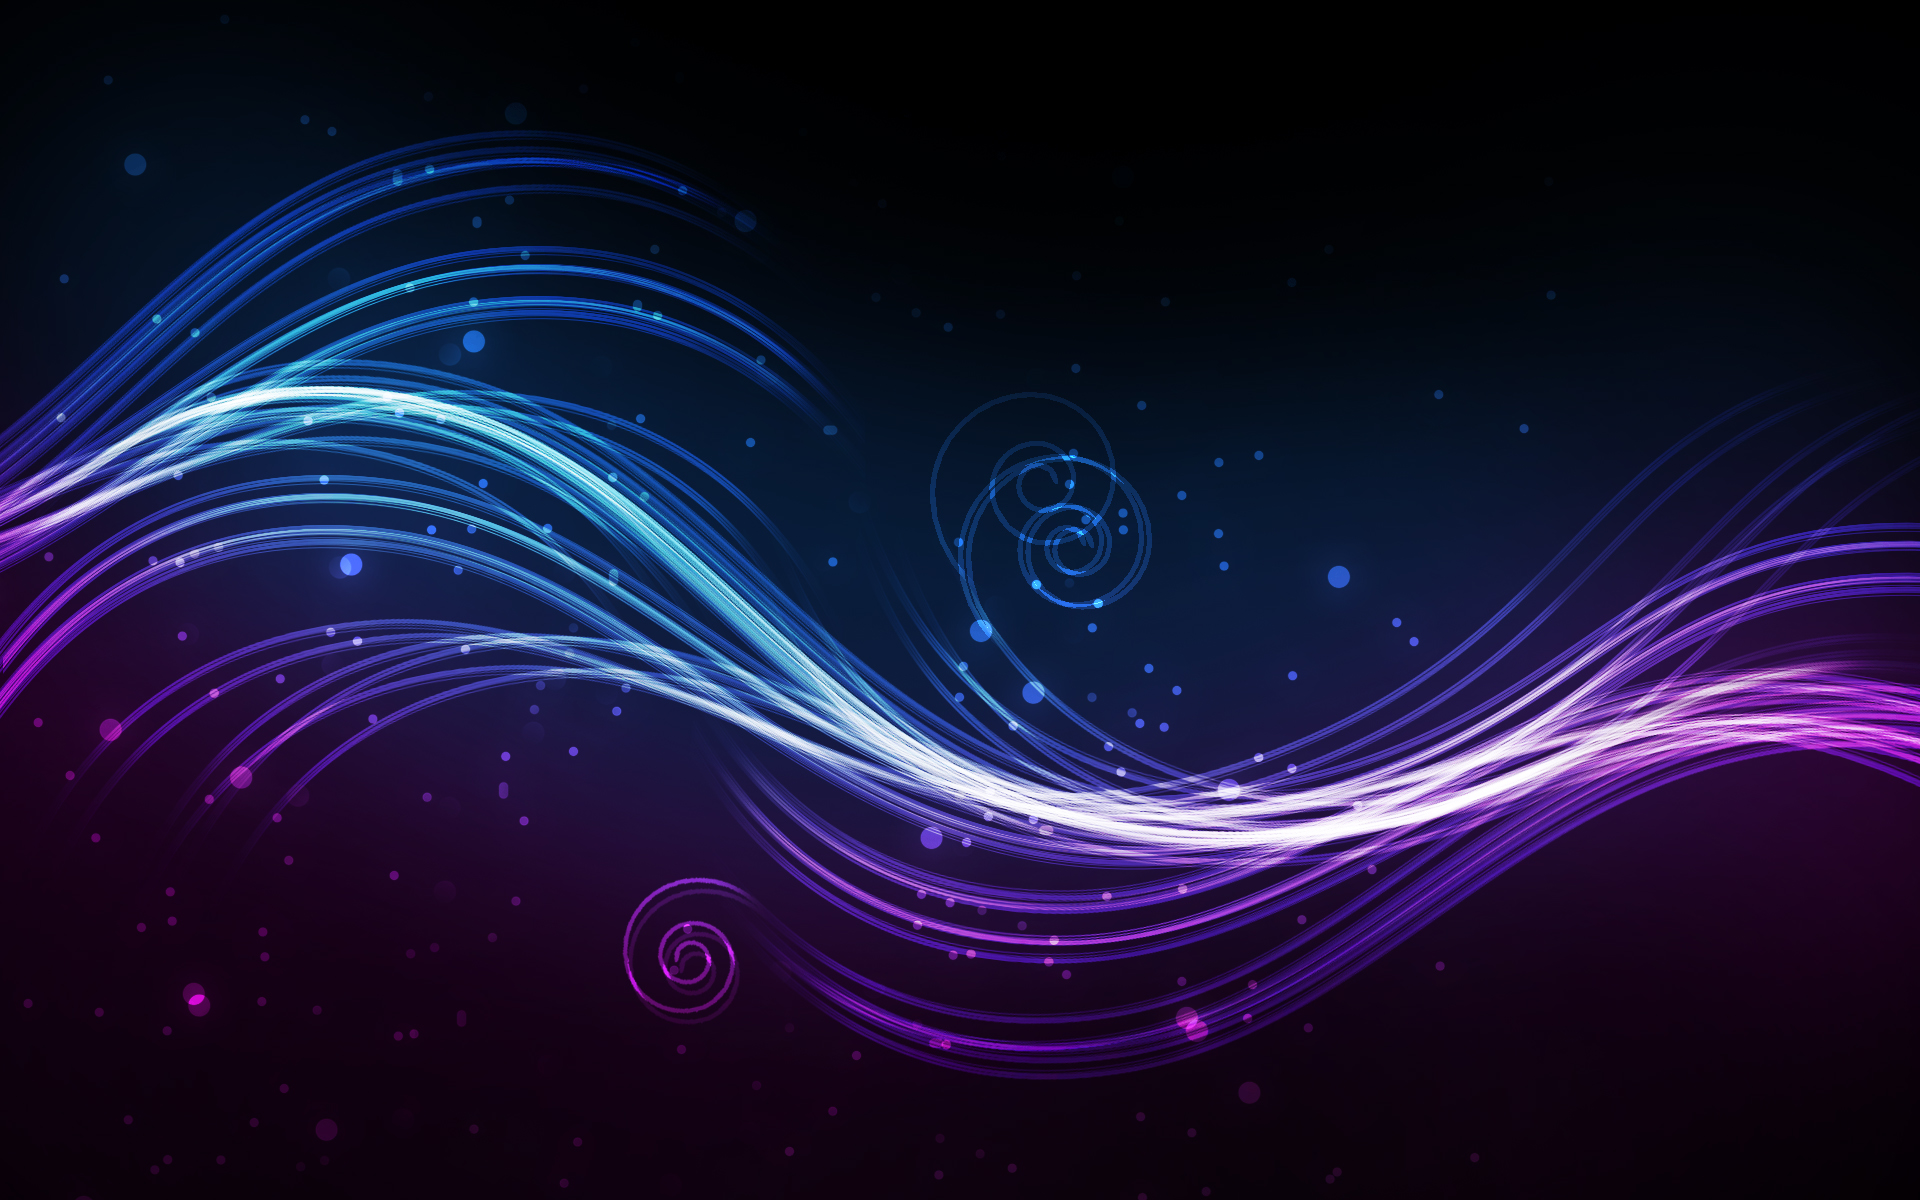 Get Colorful Background For Your Desktop And Give It A More